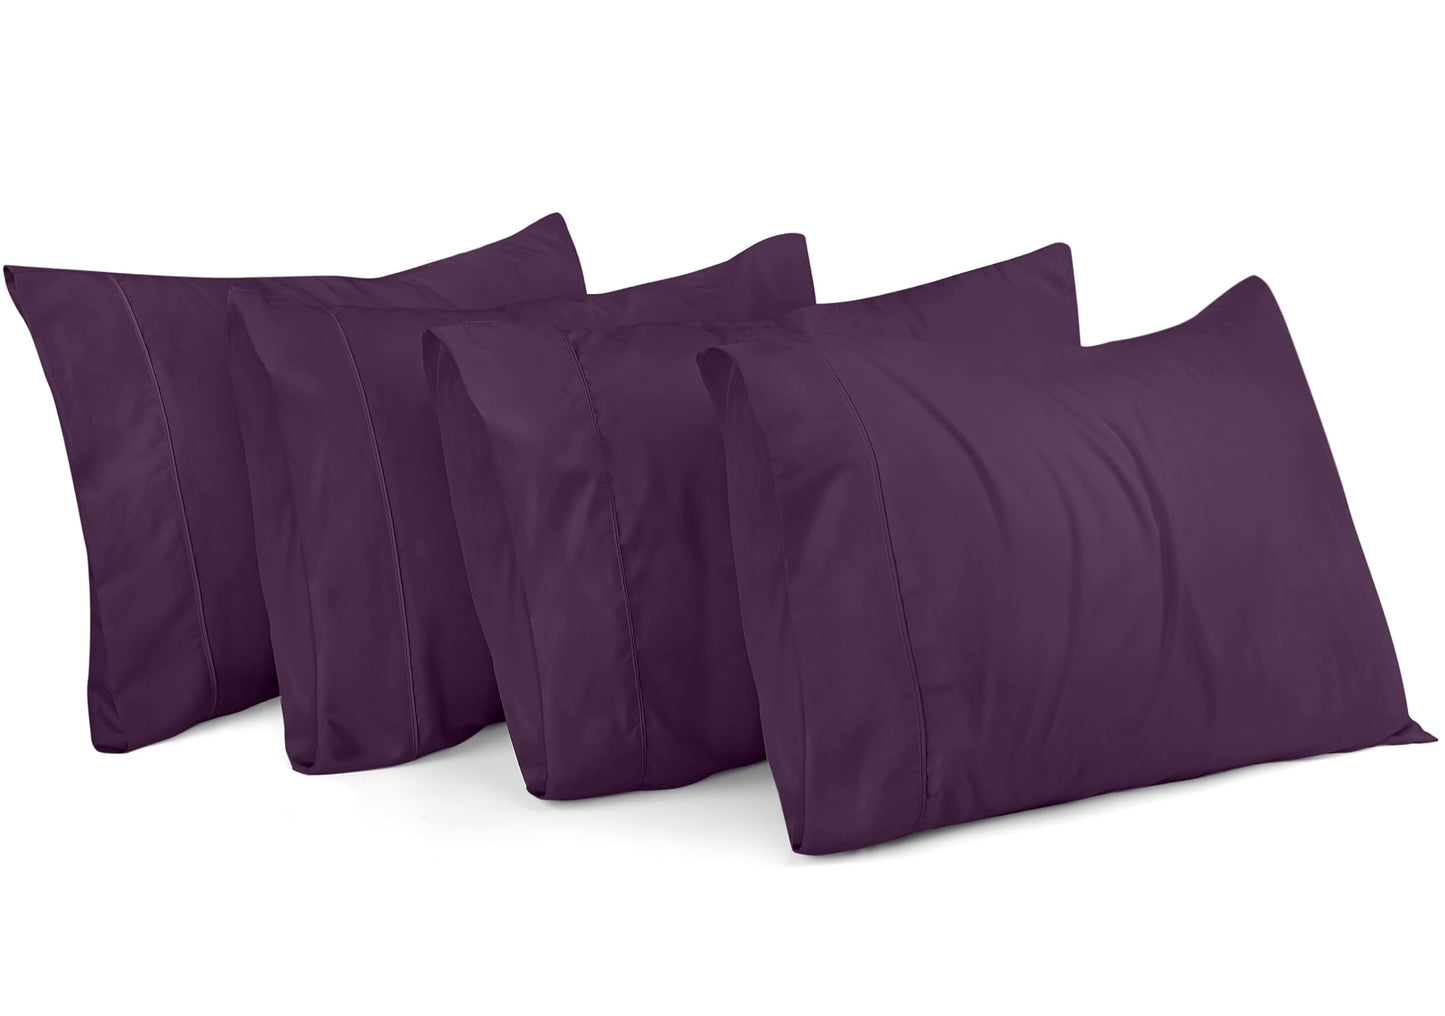 Utopia Bedding King Pillow Cases - 4 Pack - Envelope Closure - Soft Brushed Microfiber Fabric - Shrinkage and Fade Resistant Pillow Cases 20 X 40 (King, Purple)